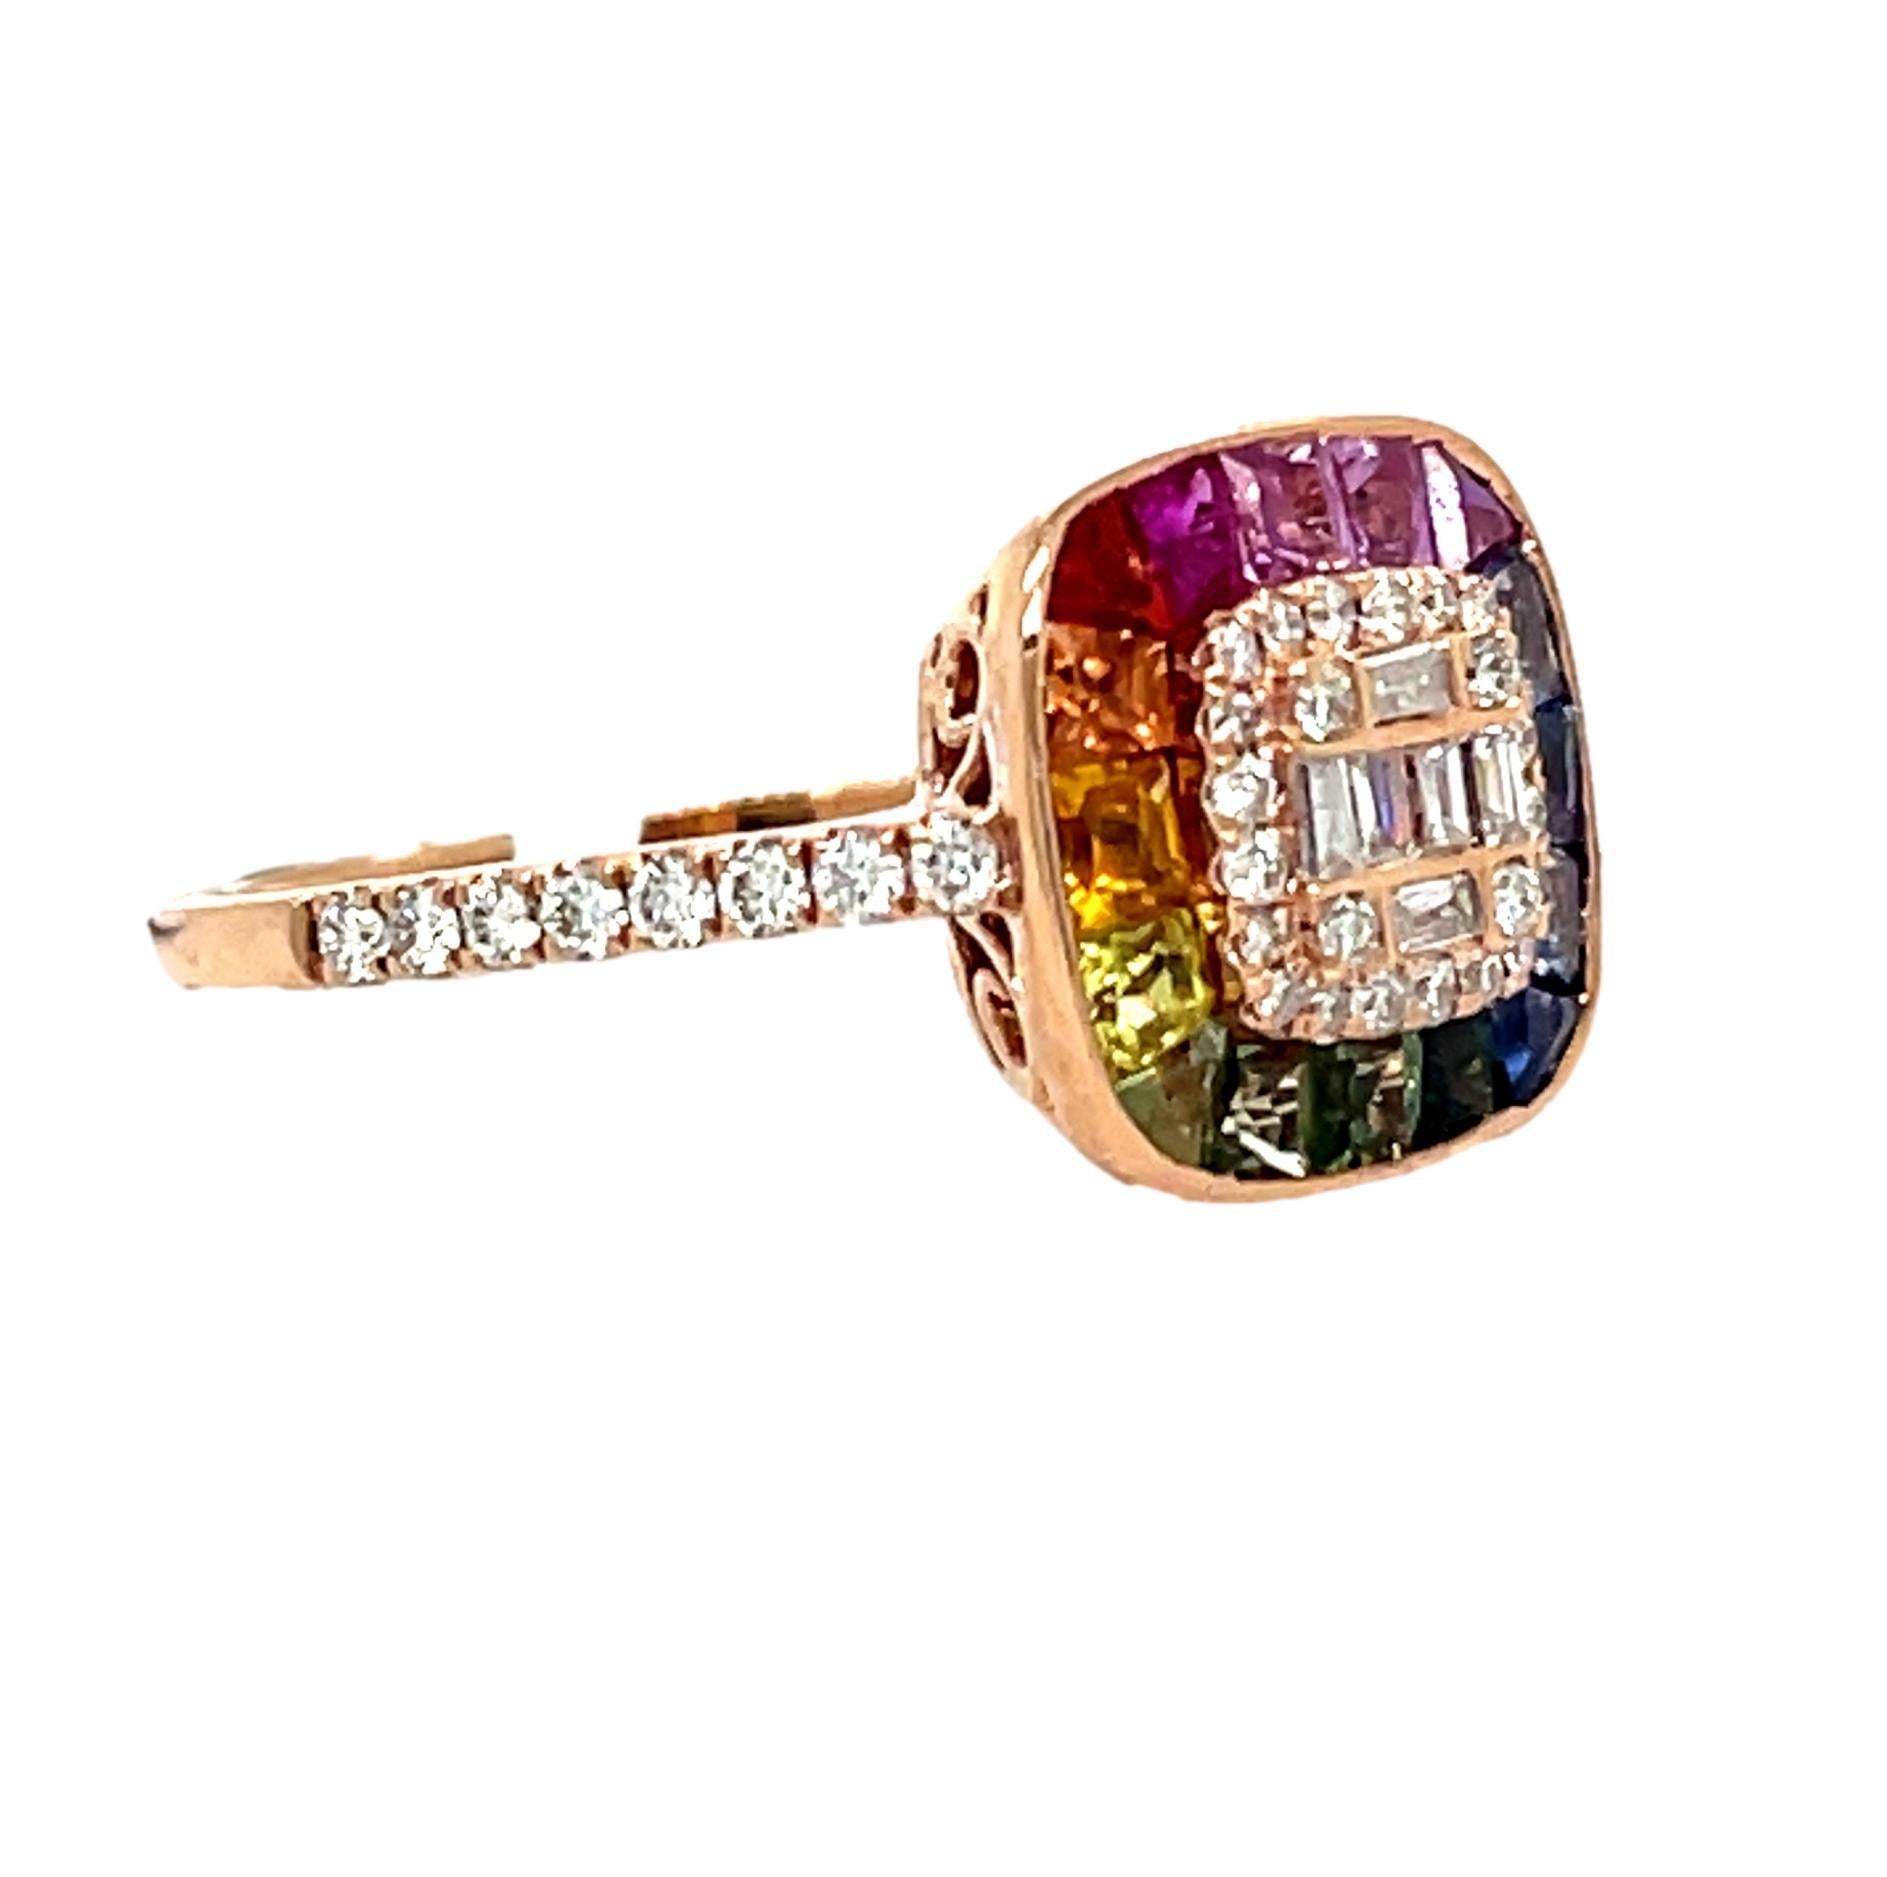 This stunning ring has a 10 mm round top quality Morganite center surrounded by a halo of sparkling brilliant cut diamonds. The stones are set in 14 karat rose gold. This ring has a split shank with diamonds on it for a perfect accent. This ring